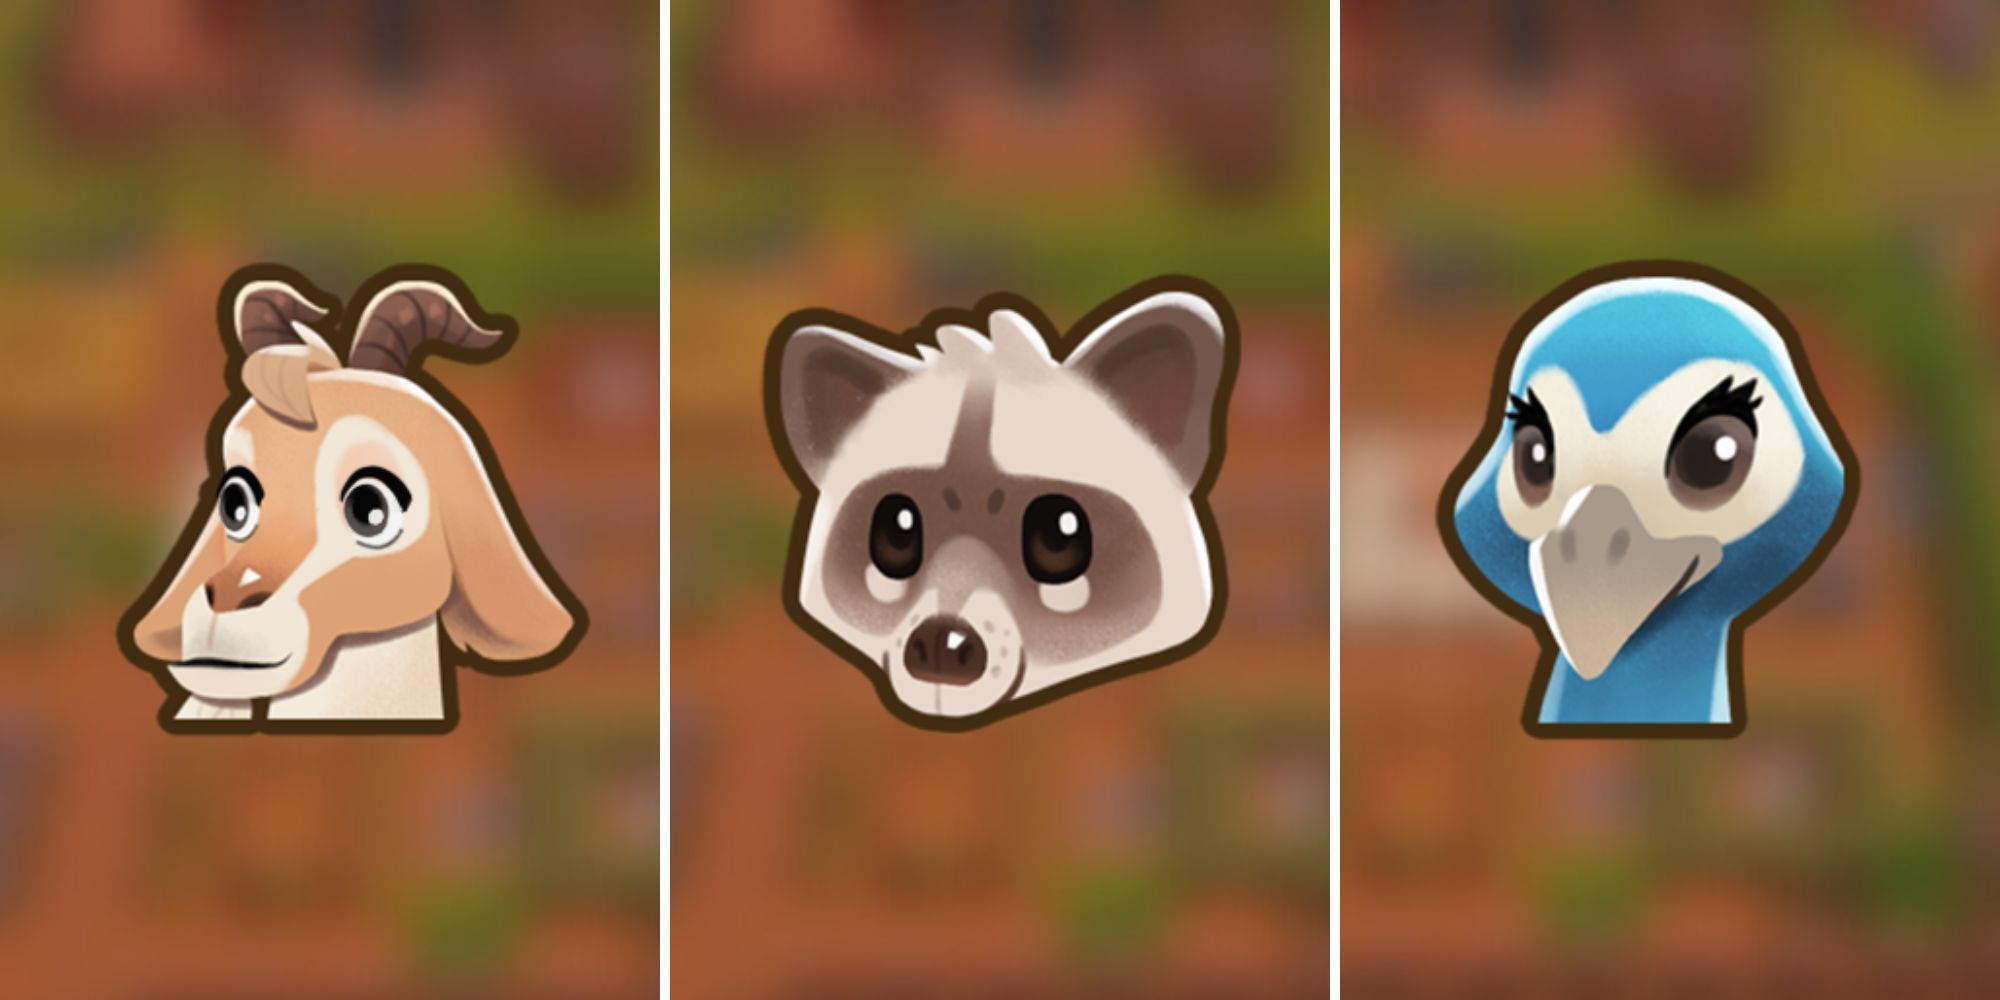 A grid showing three different animals in Coral Island